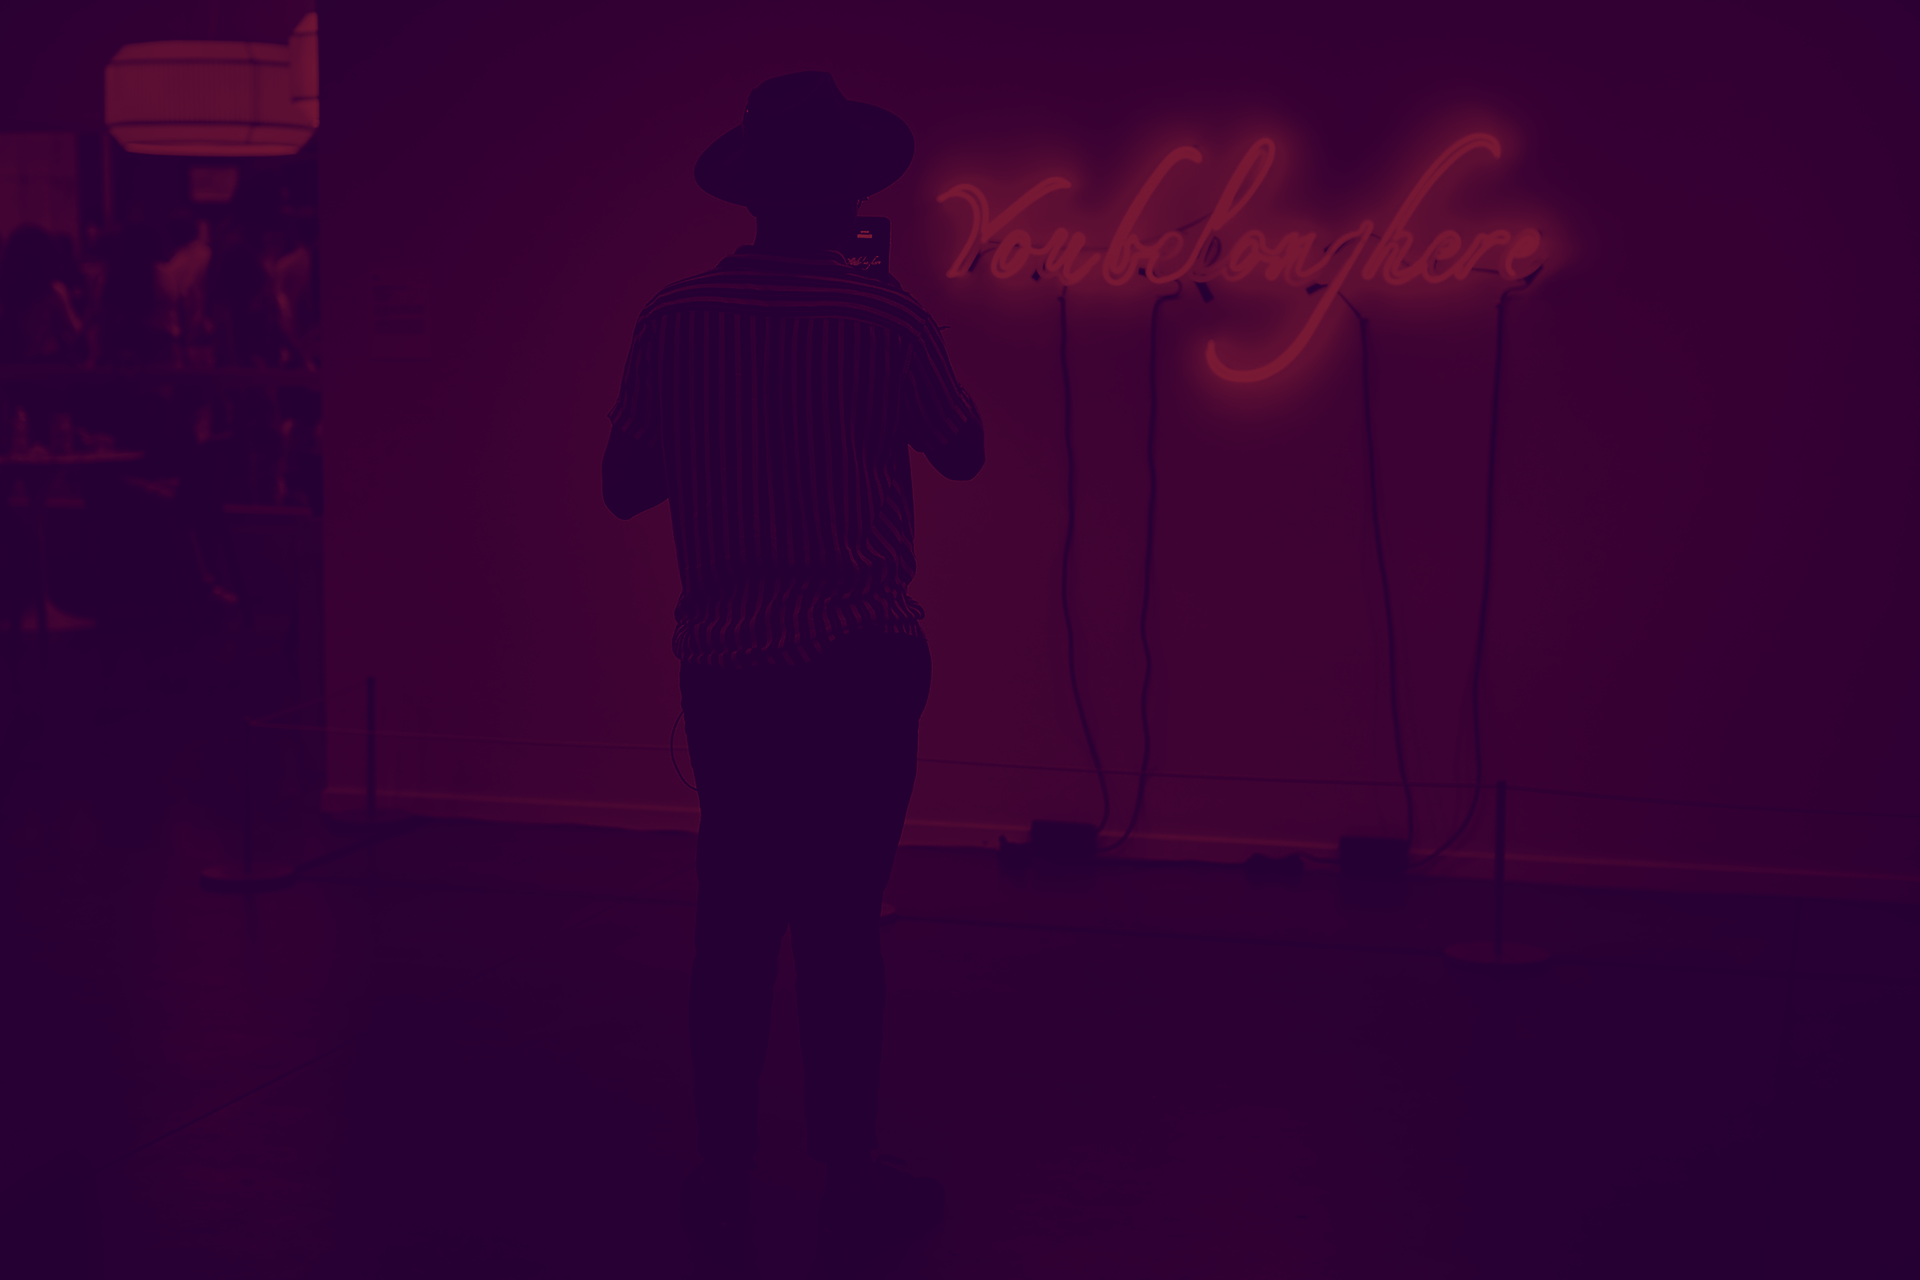 Standing with back to the viewer and in shadow, a person photographs a neon sign. It says, in light blue script, “You belong here.” A purple filter has been applied to the photo.